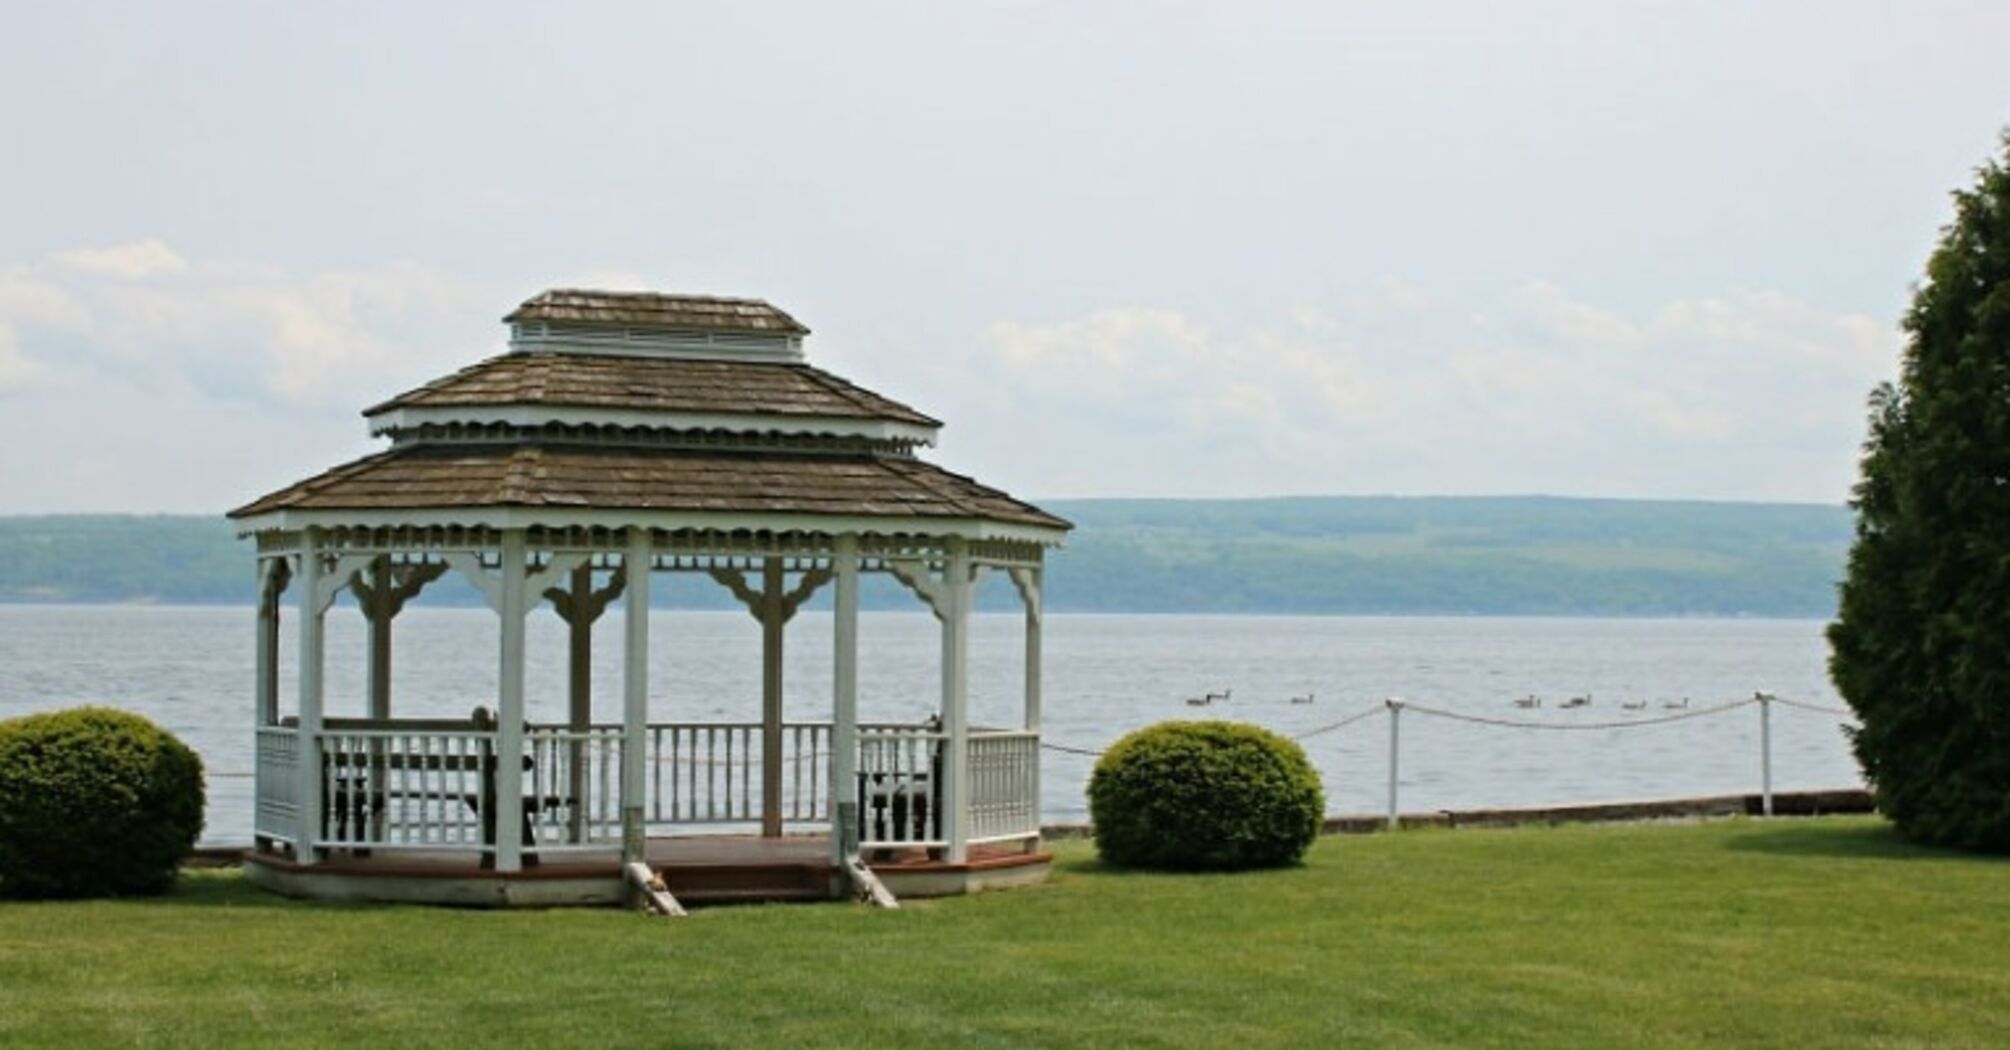 Best Finger Lakes resorts: Top 19 places to vacation by the lake